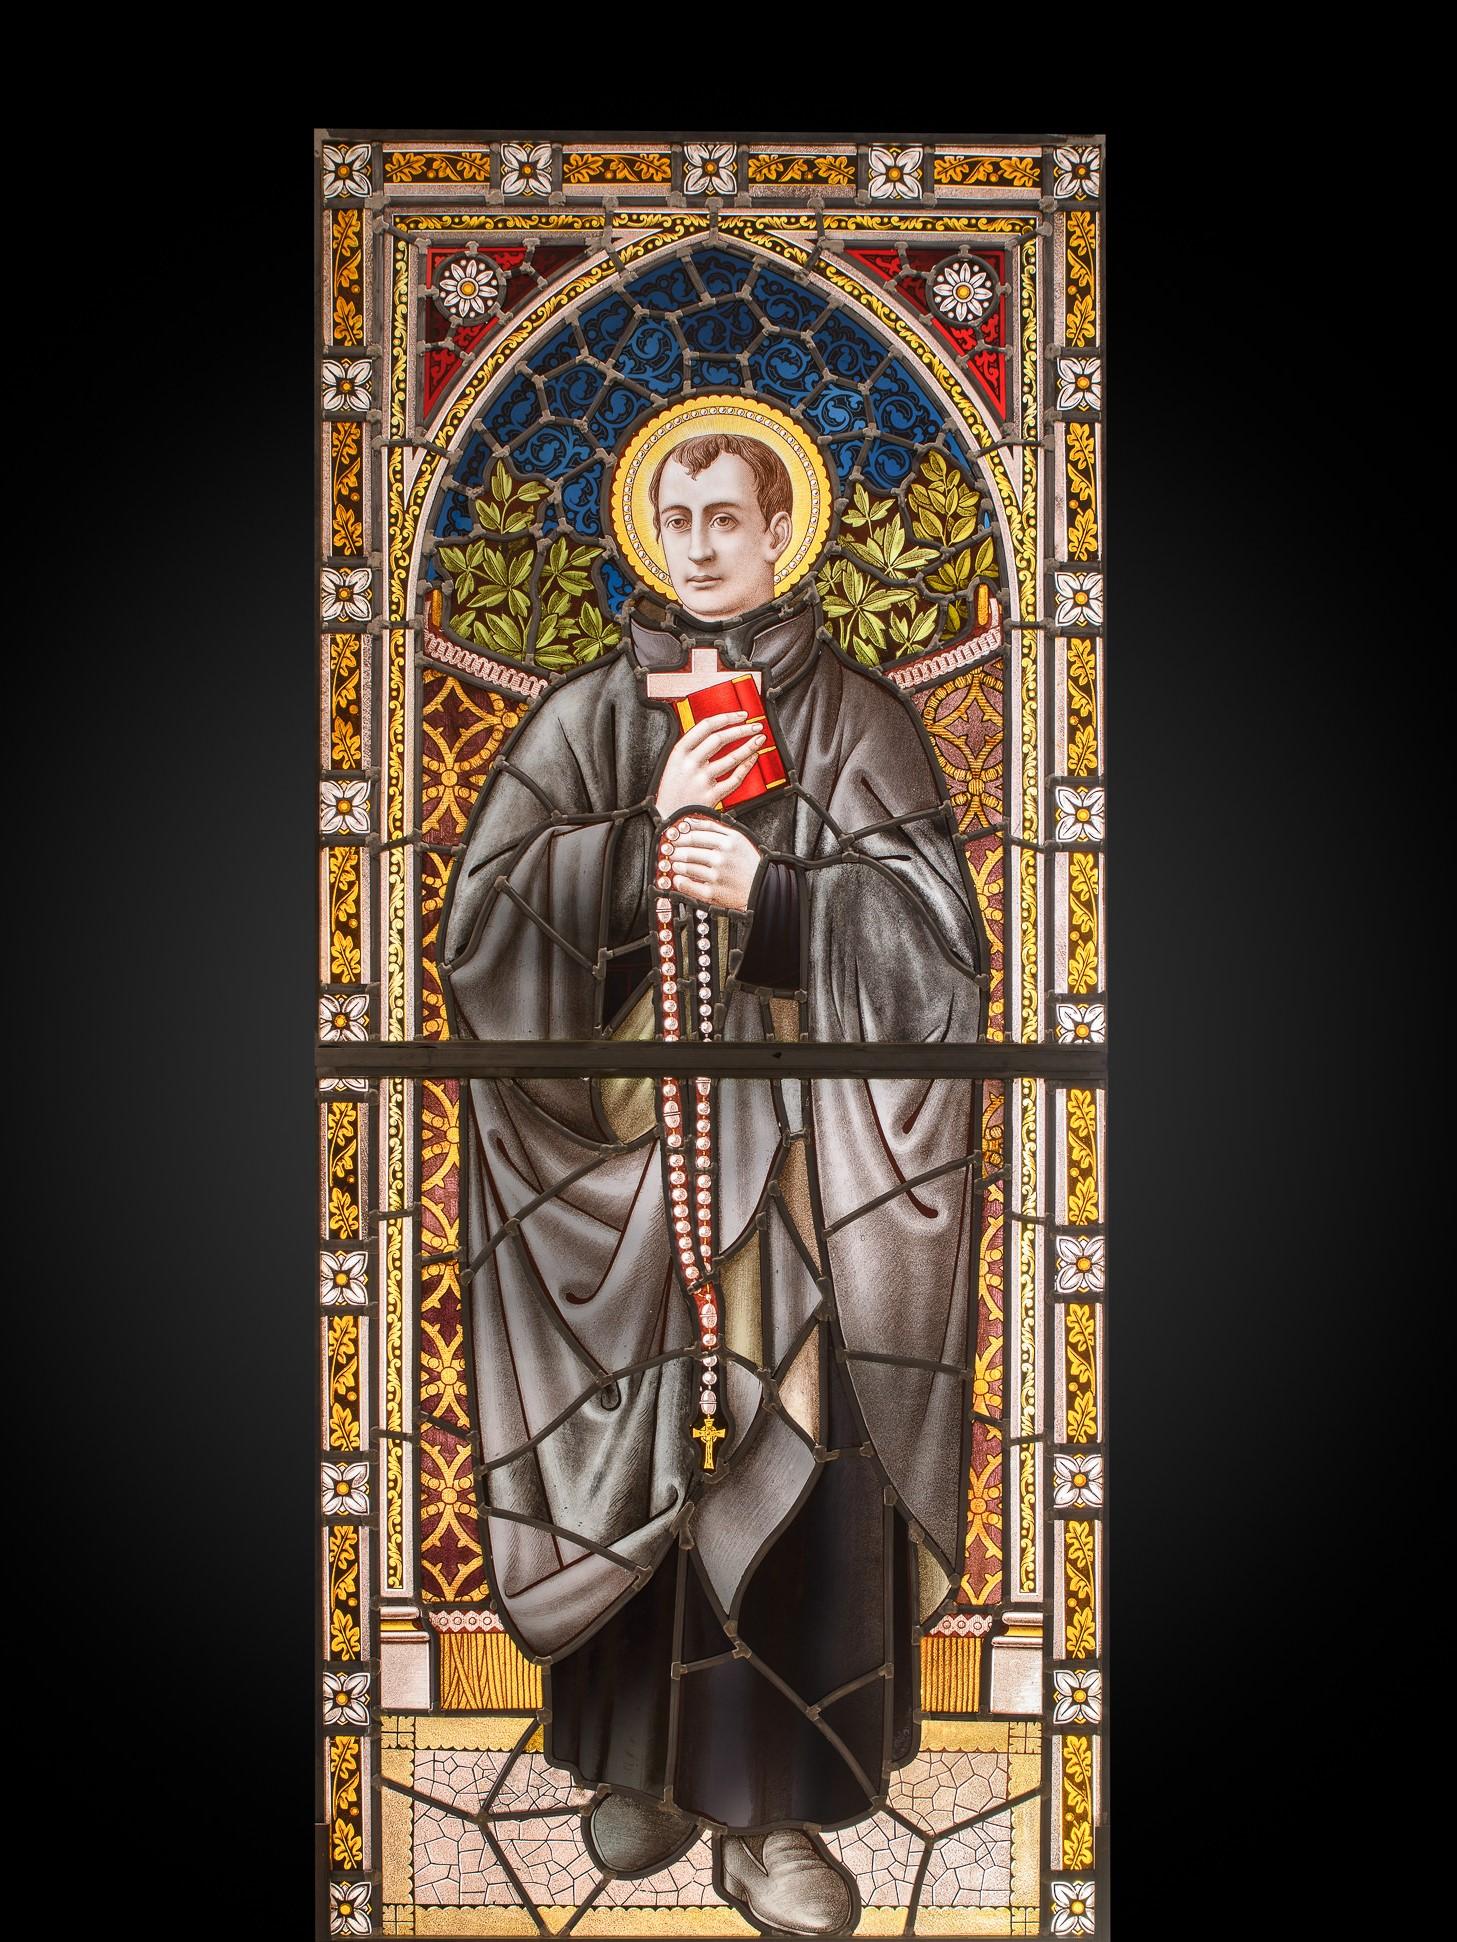 Neo-Gothic Stained Glass Window with St. John Berchmans. - Painting by Unknown